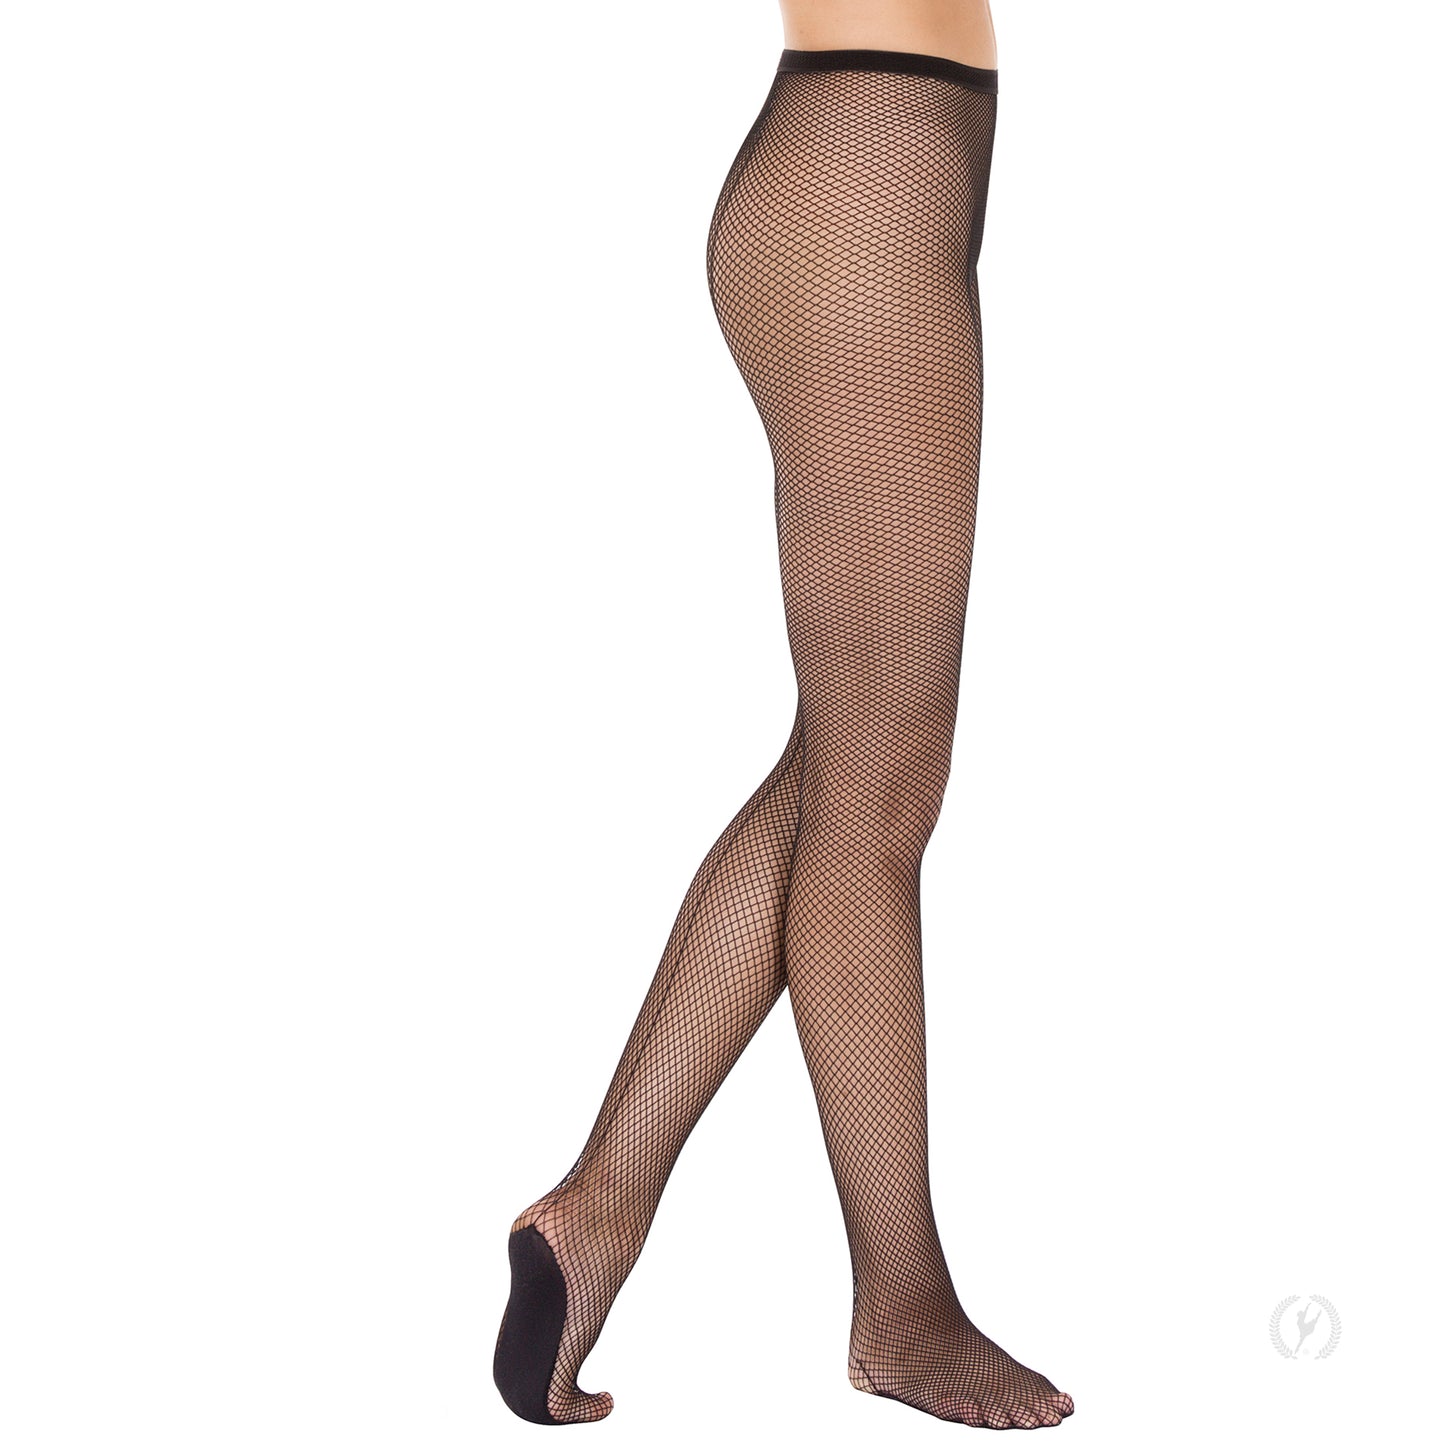 Eurotard 214 Adult Professional Back Seam Fishnet Tights by EuroSkins